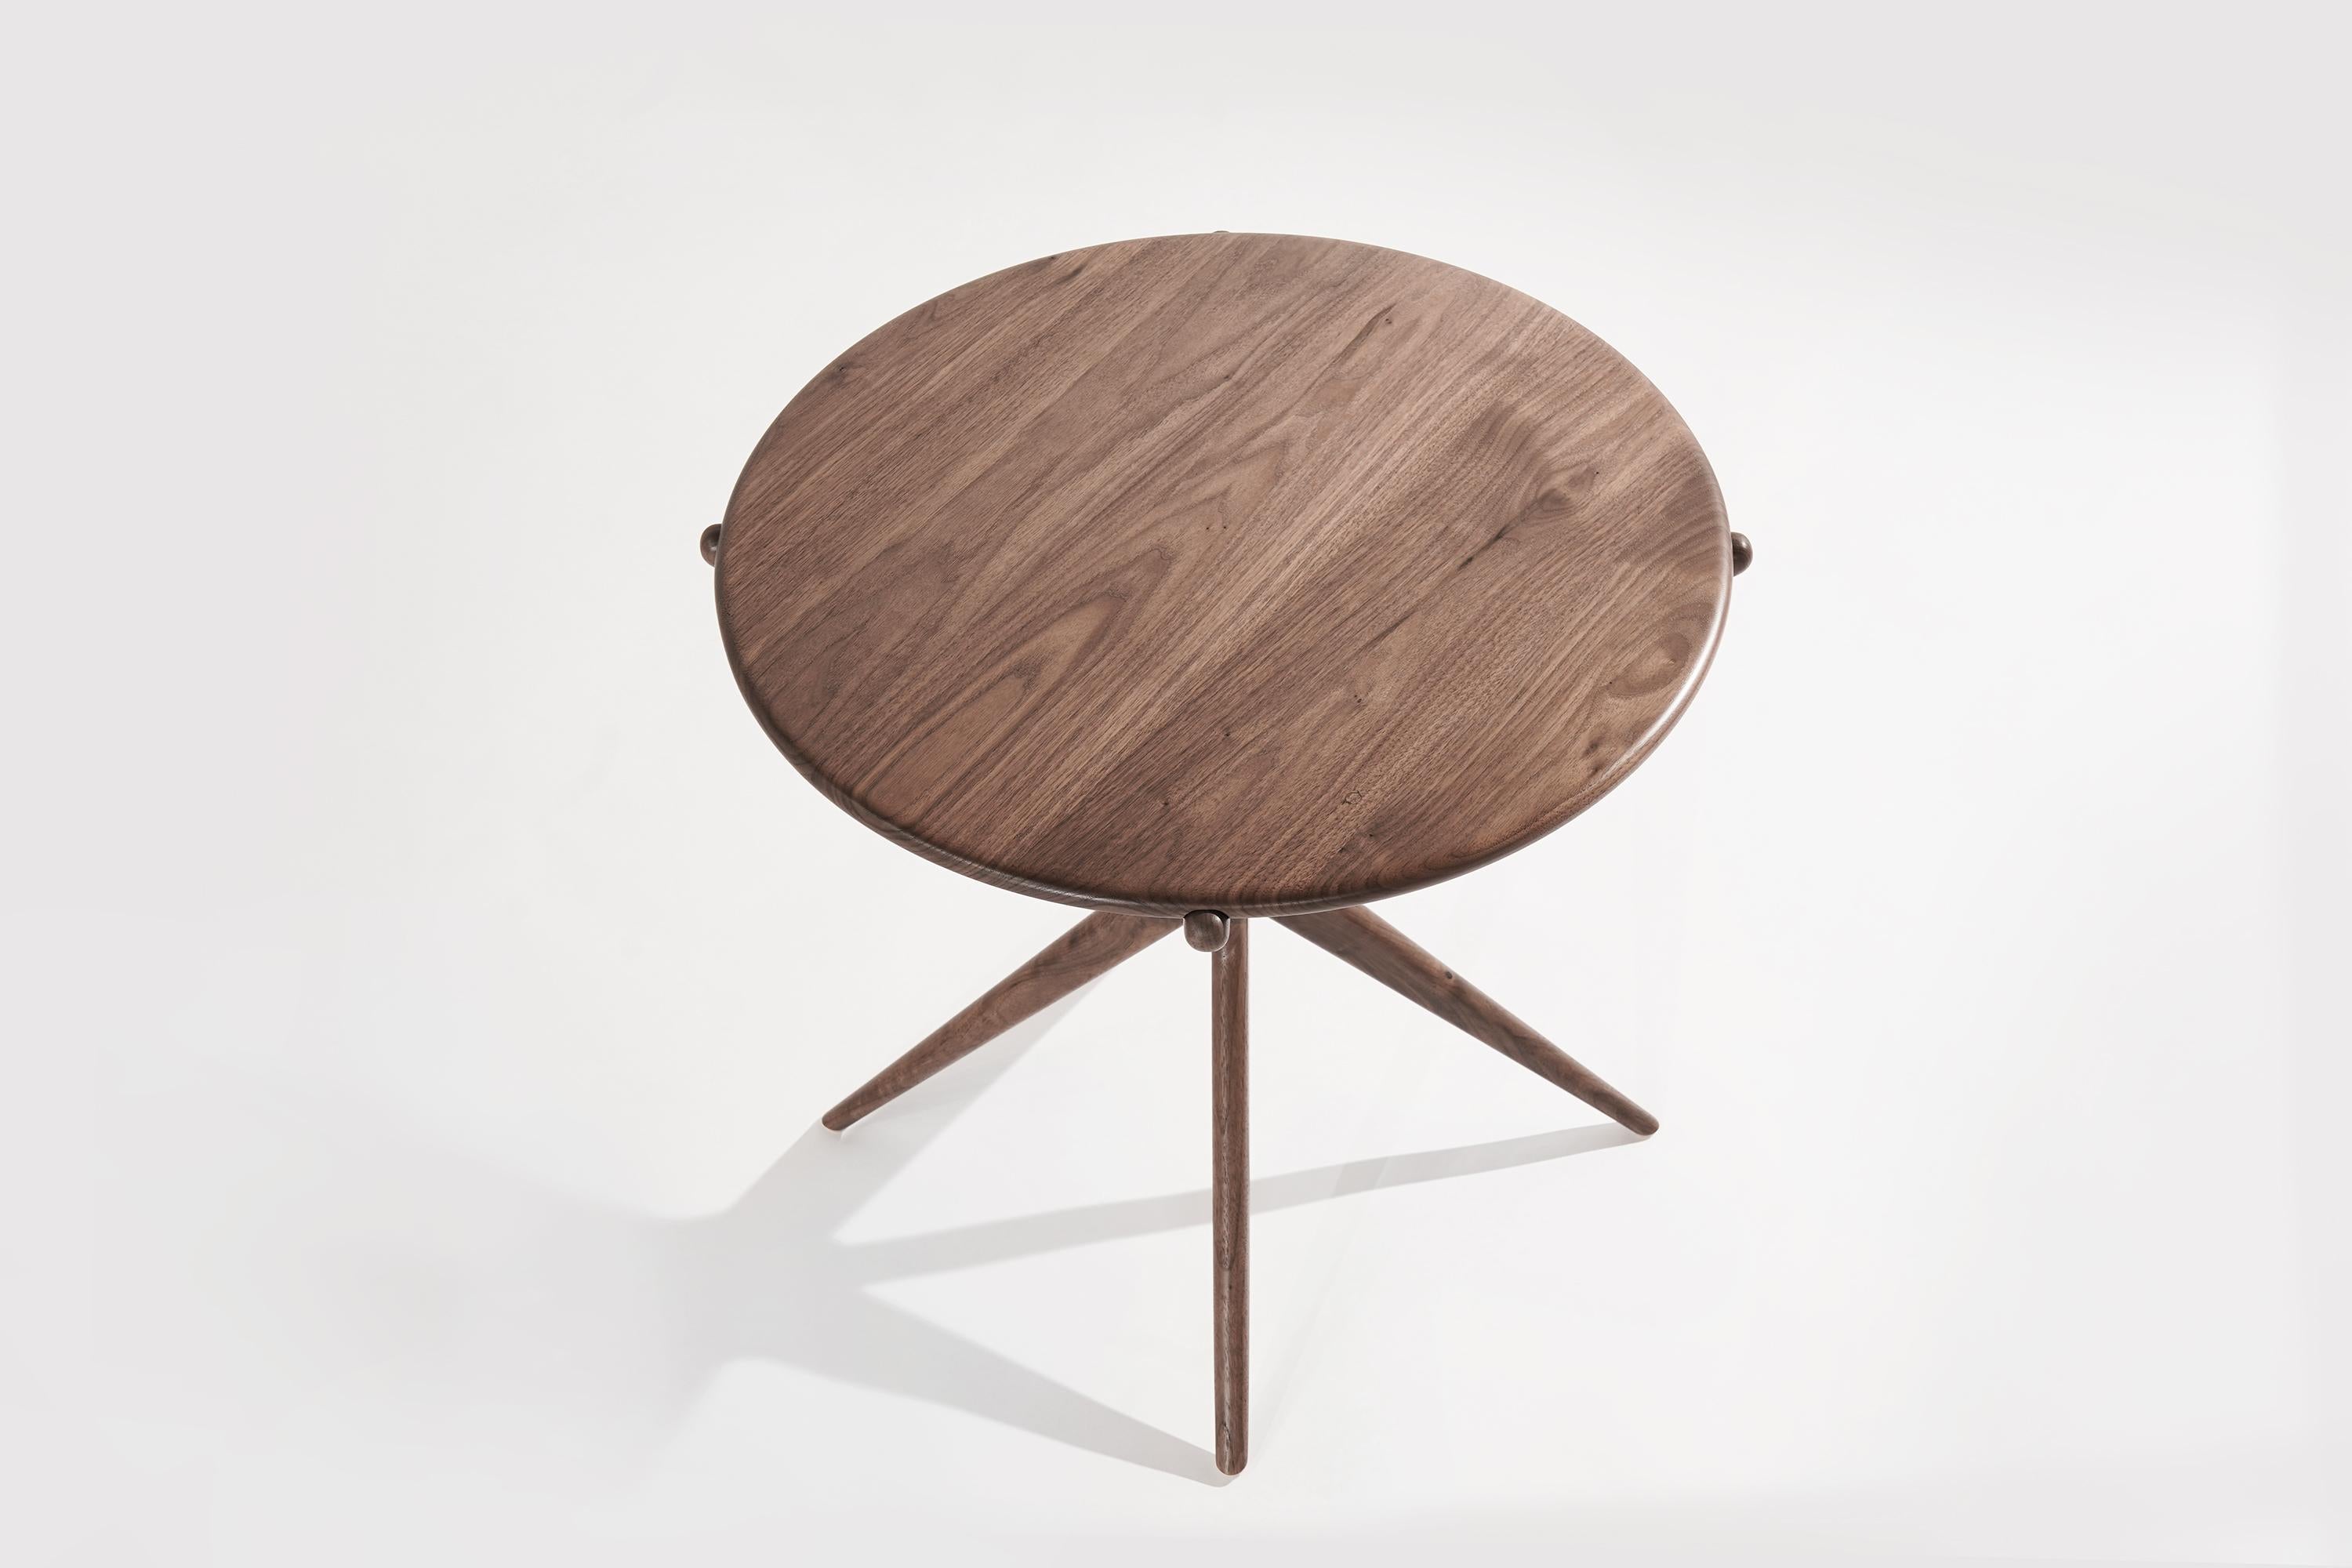 Contemporary Walnut Gazelle Occasional Table by Stamford Modern